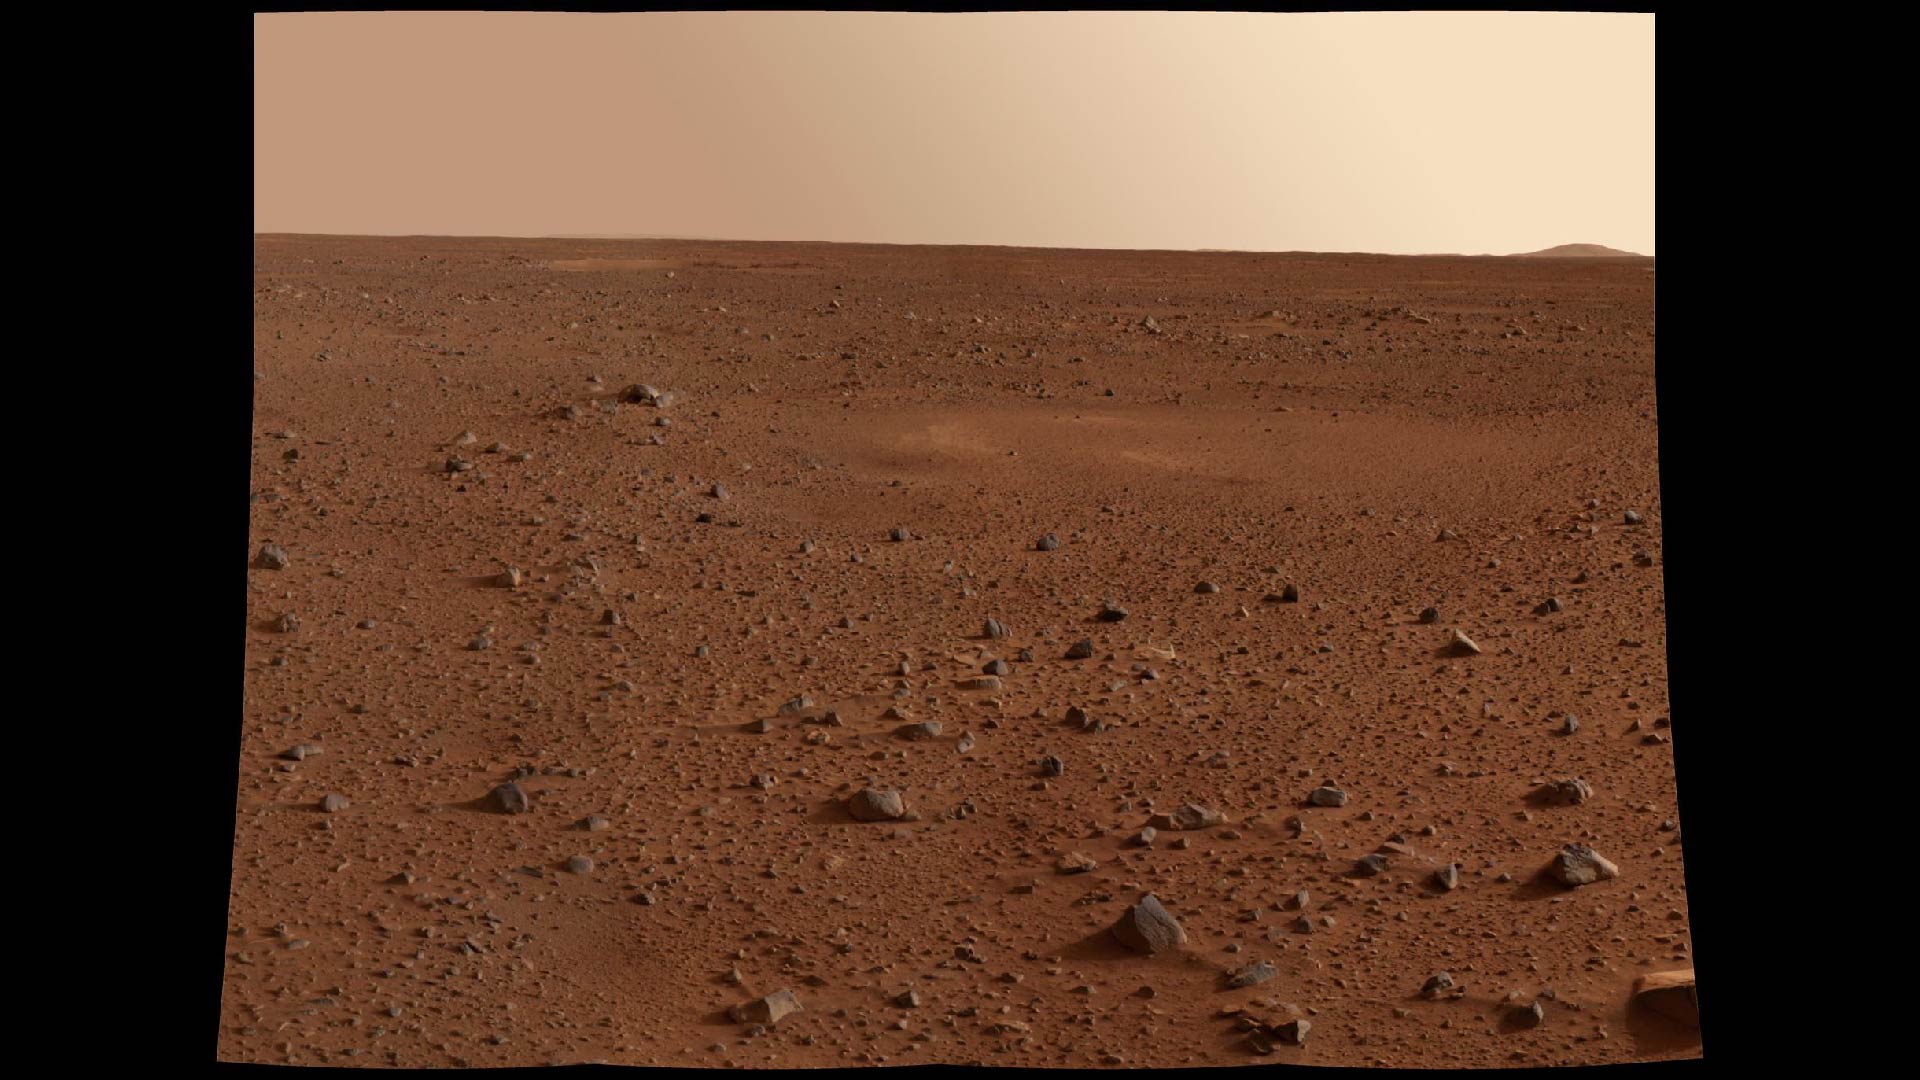 A photograph on the surface of Mars. It features red dirt and rocks in a barren landscape with a light yellow sky.